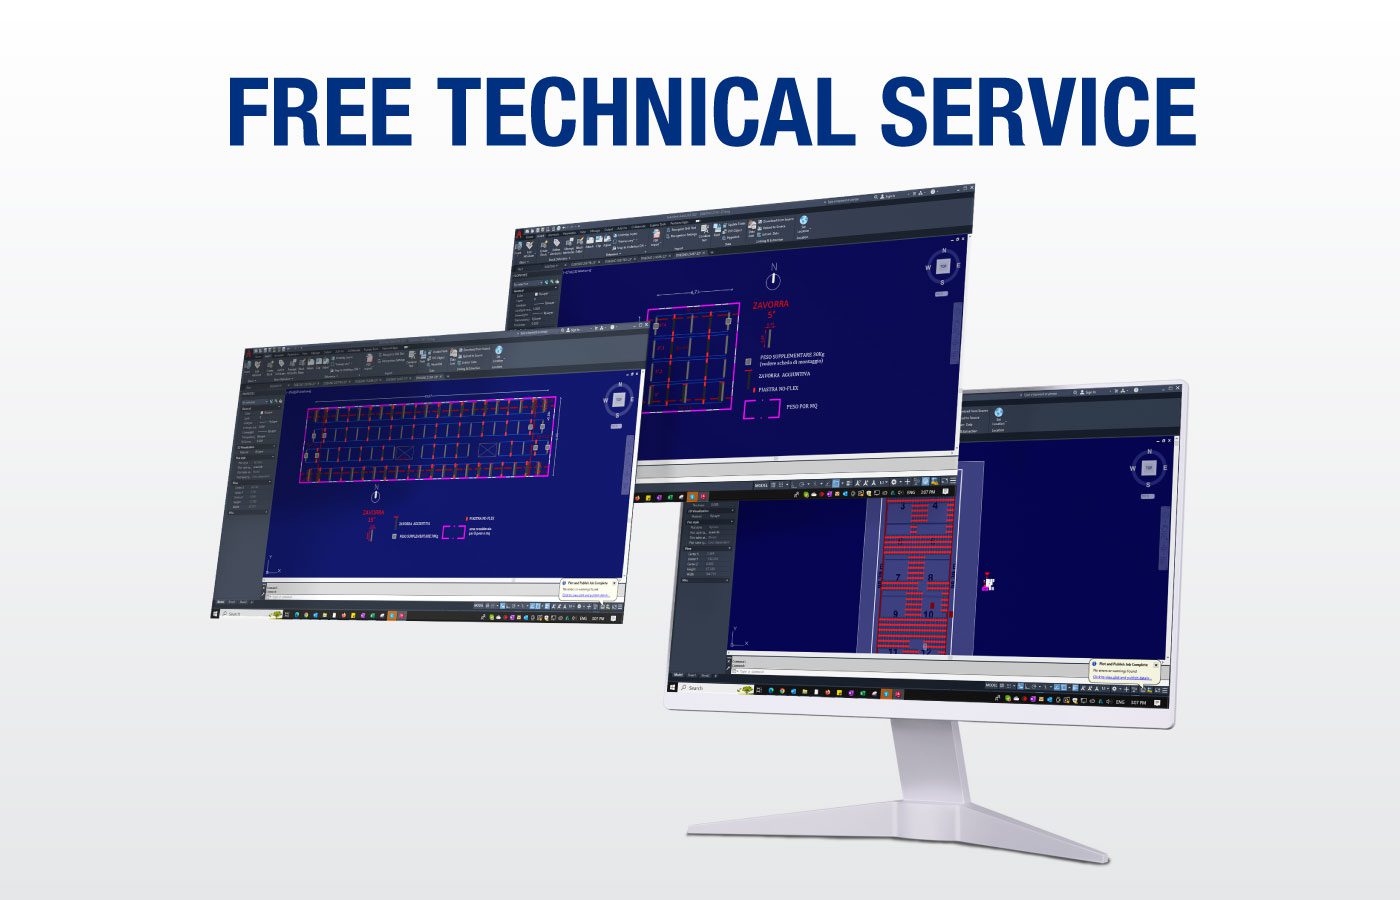 Free technical assistance service